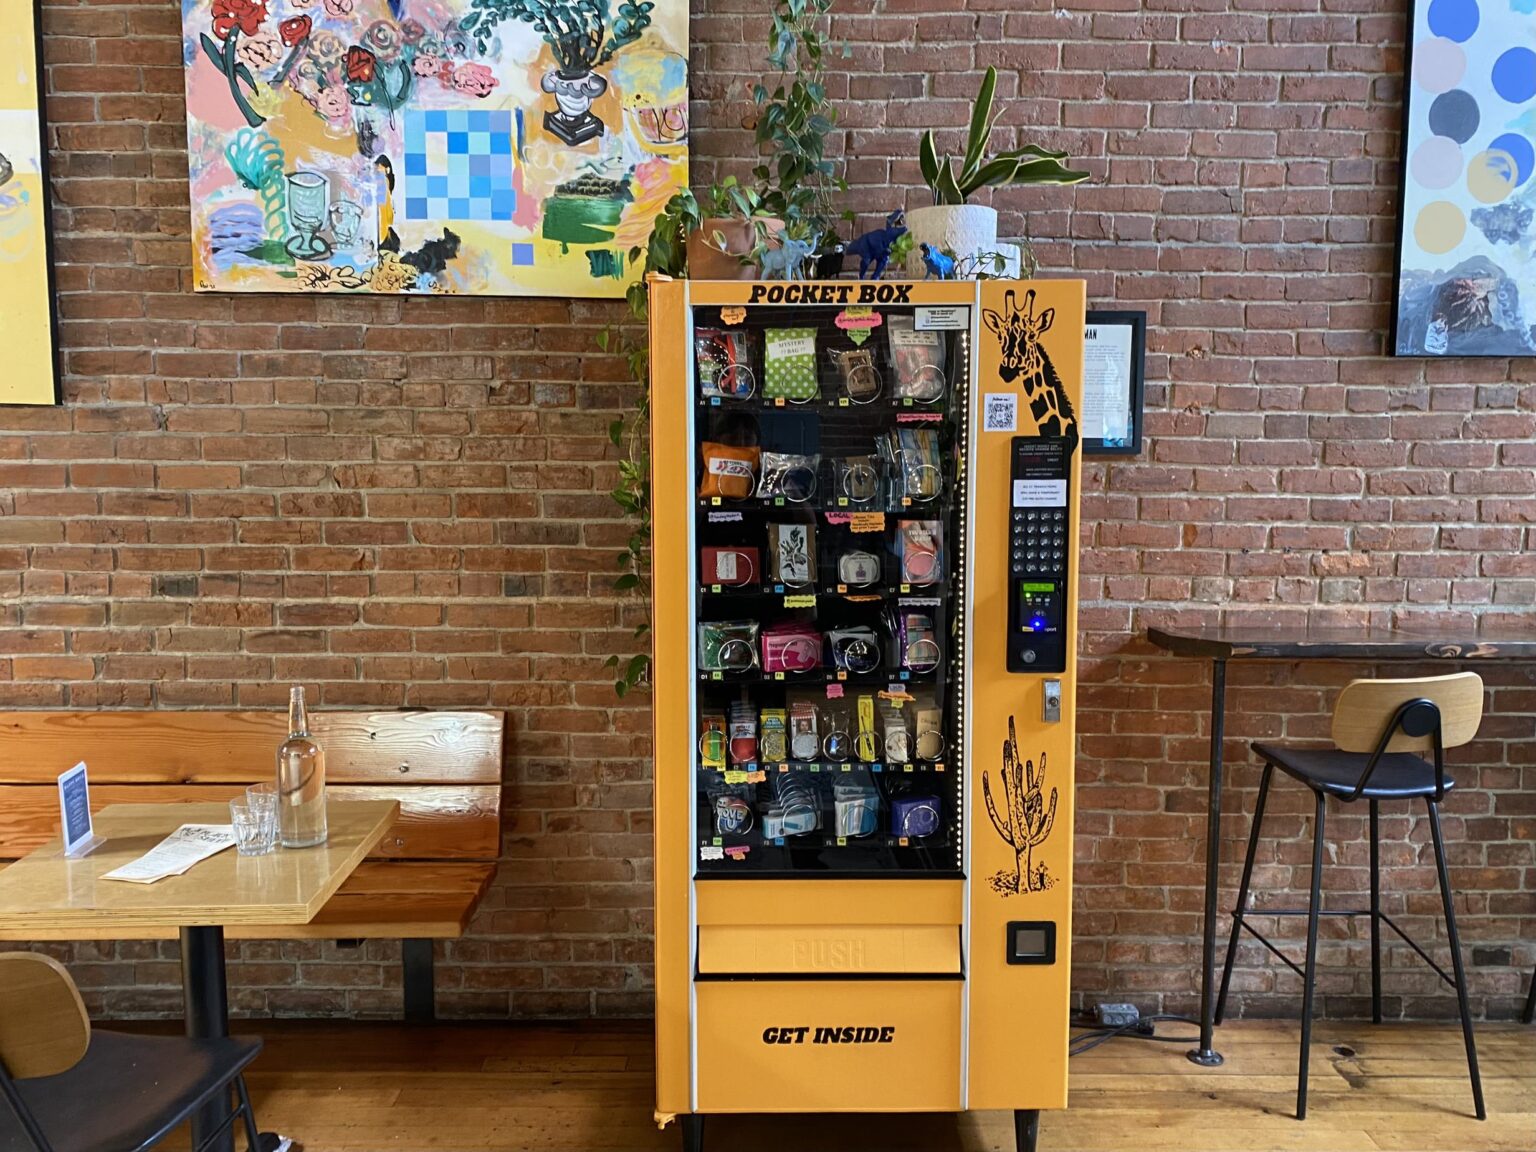 A Pocket Box vending machine inside of Black Sheep. The vending machine is one of three in downtown Bellingham.